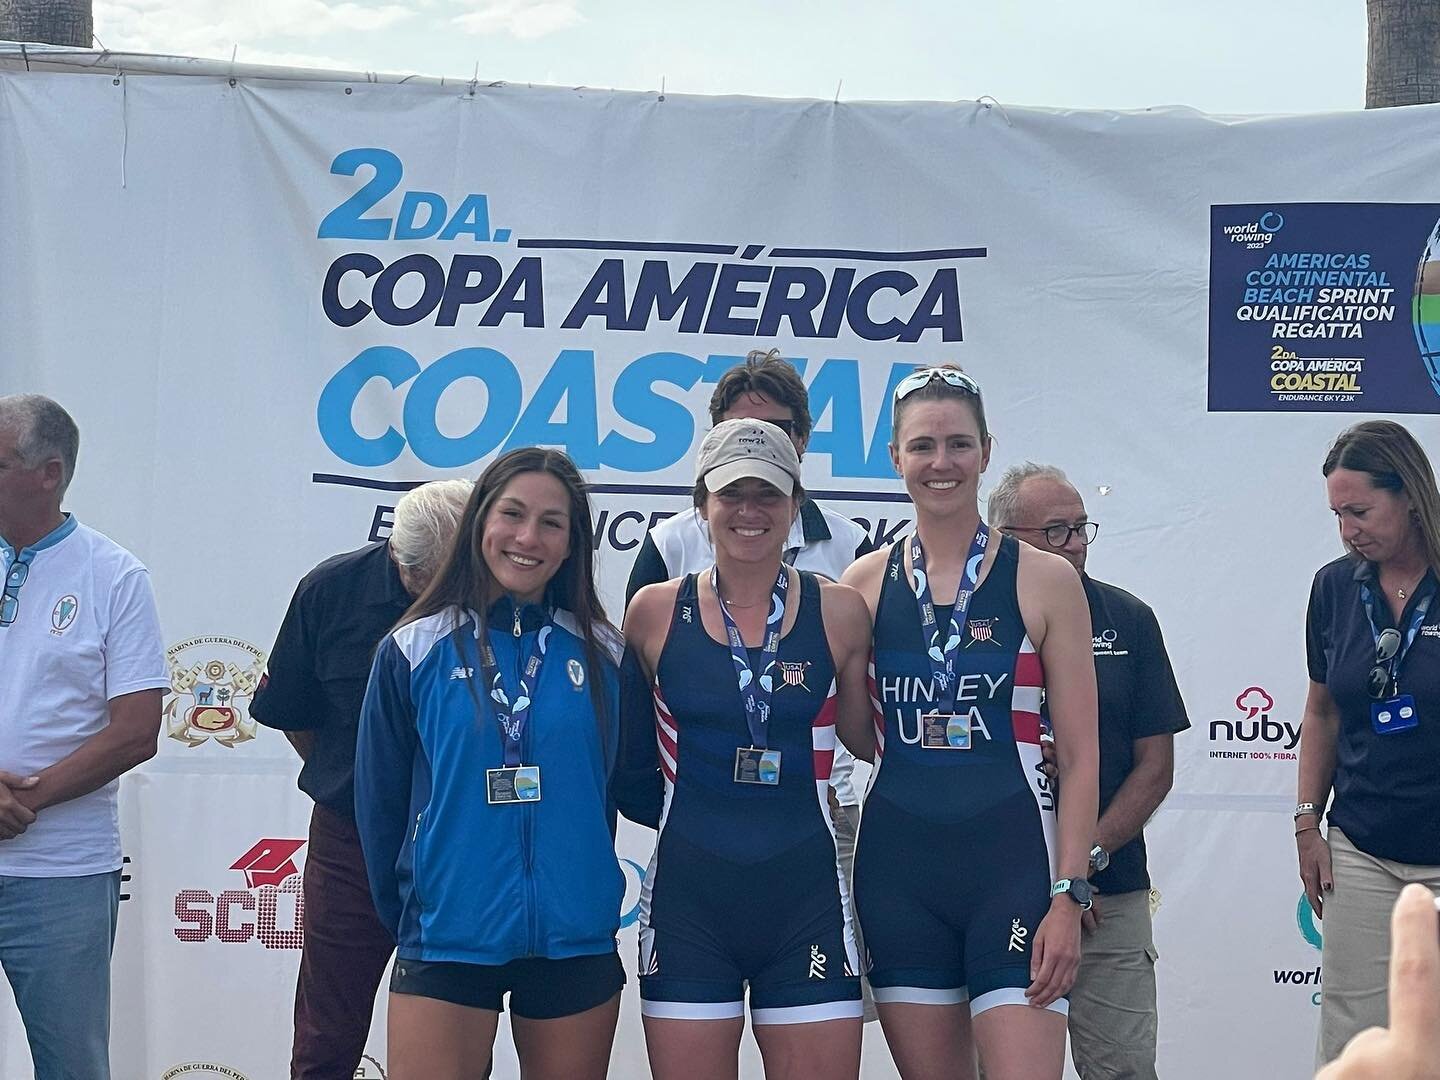 Lots of #podium pictures for the team! Really great showing at the 6k race in Copa America, Peru. Many of our athletes doubled up for two or even three races, with some back to back. That&rsquo;s a lot of meters! Working hard and having fun.
The tall